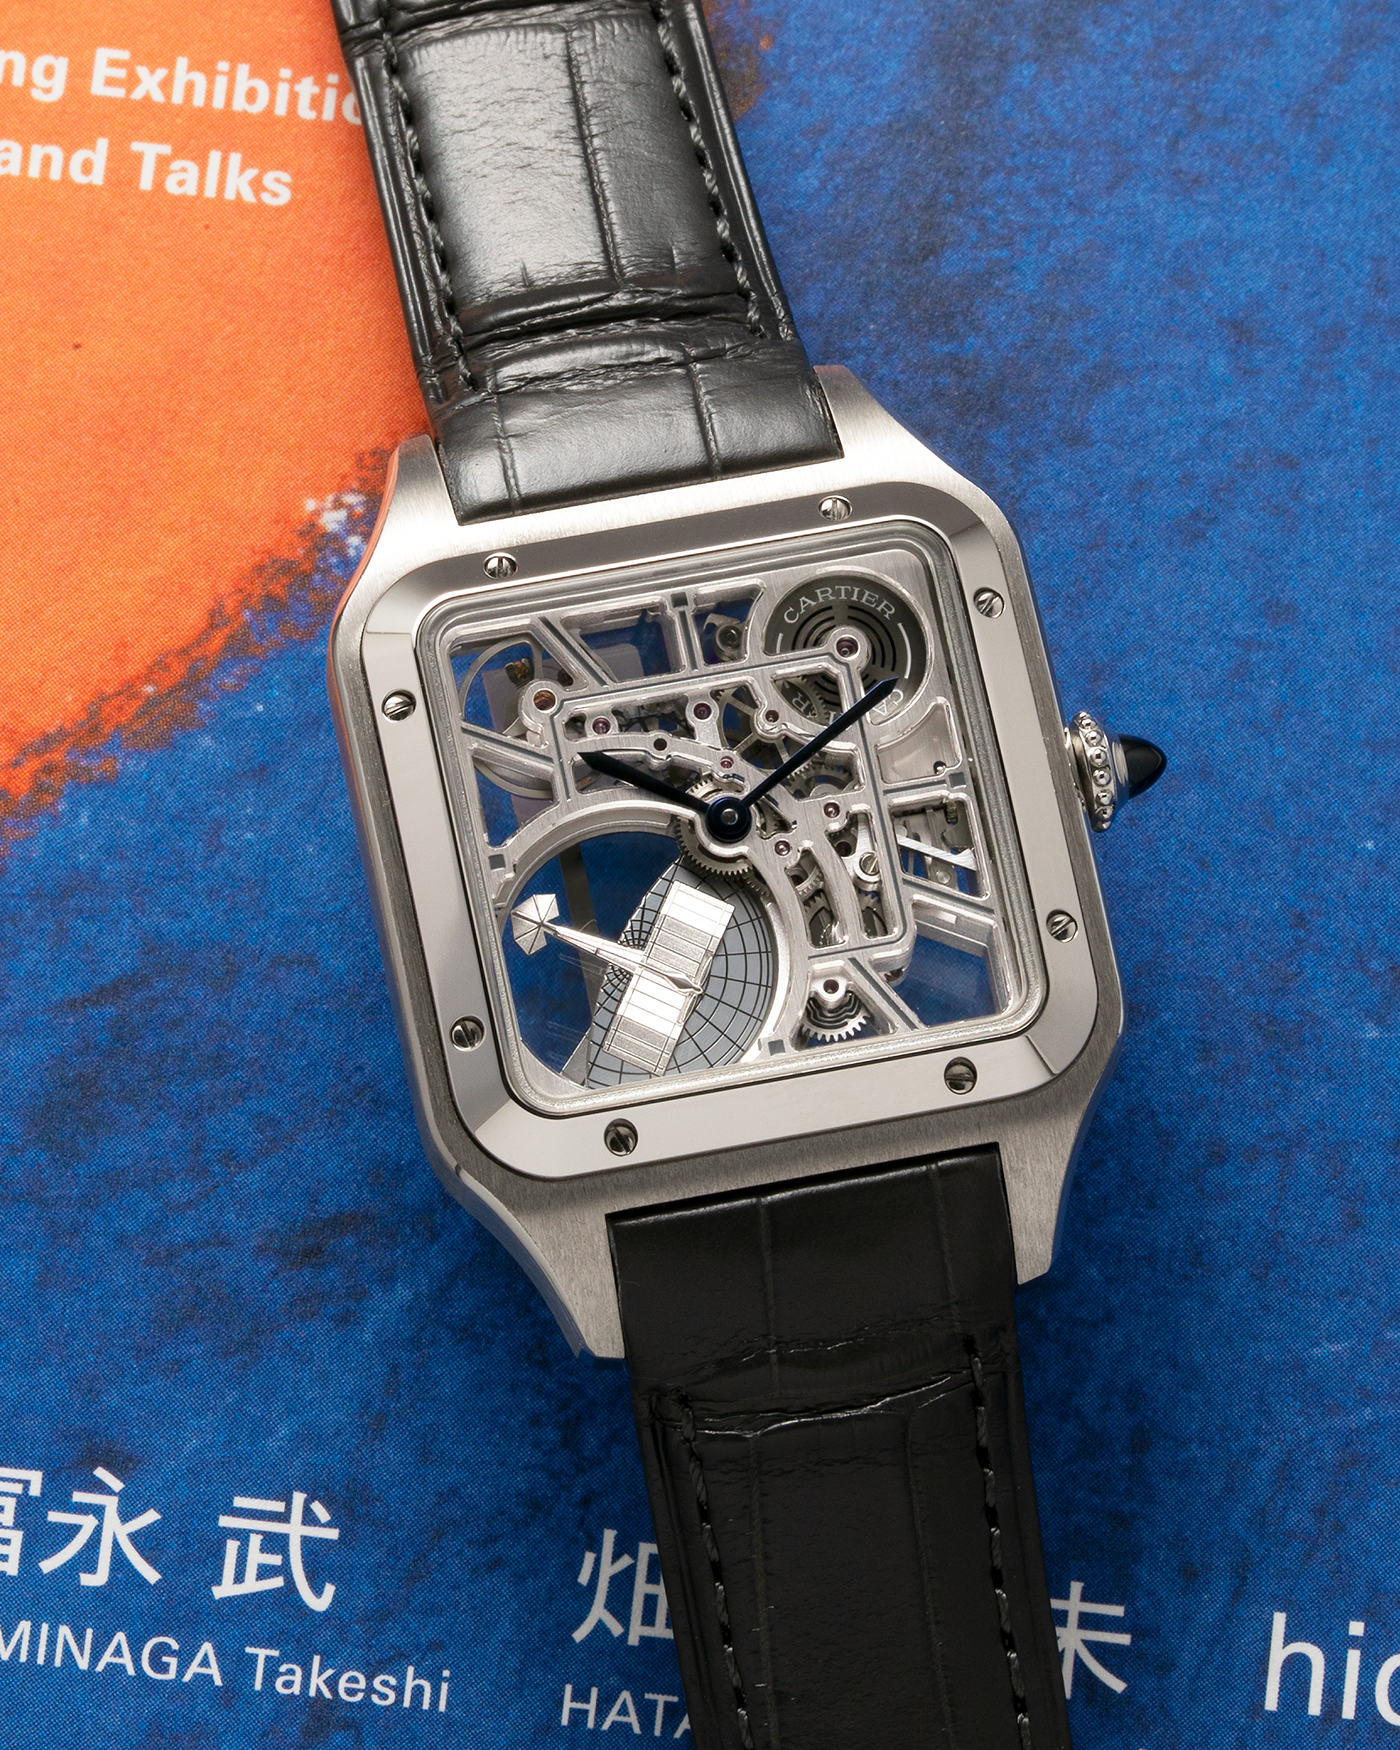 Brand: Cartier Year: 2023 Model: Santos Dumont Skeleton MicroRotor Reference: CRWHSA0032 Material: Stainless Steel Movement: Cartier Cal. 9629 MC, Self-Winding Micro-Rotor Case Diameter: 31.4mm x 43.5mm Strap: Cartier Grey Alligator Leather Strap with Signed Stainless Steel Ardillon Buckle